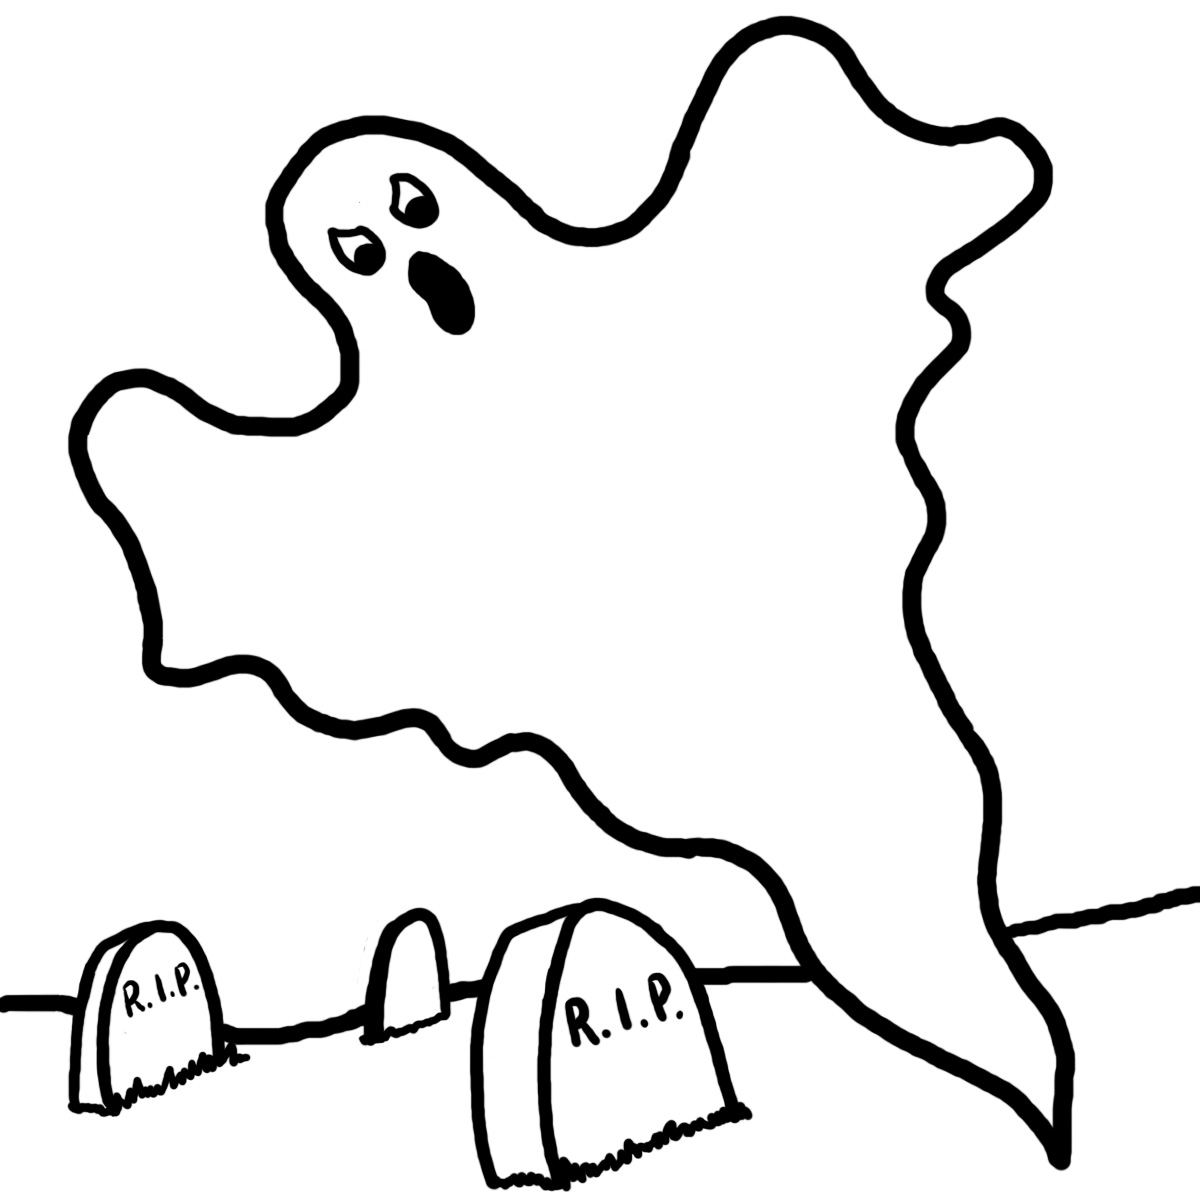 Halloween Ghost Clipart - Free Clipart Images